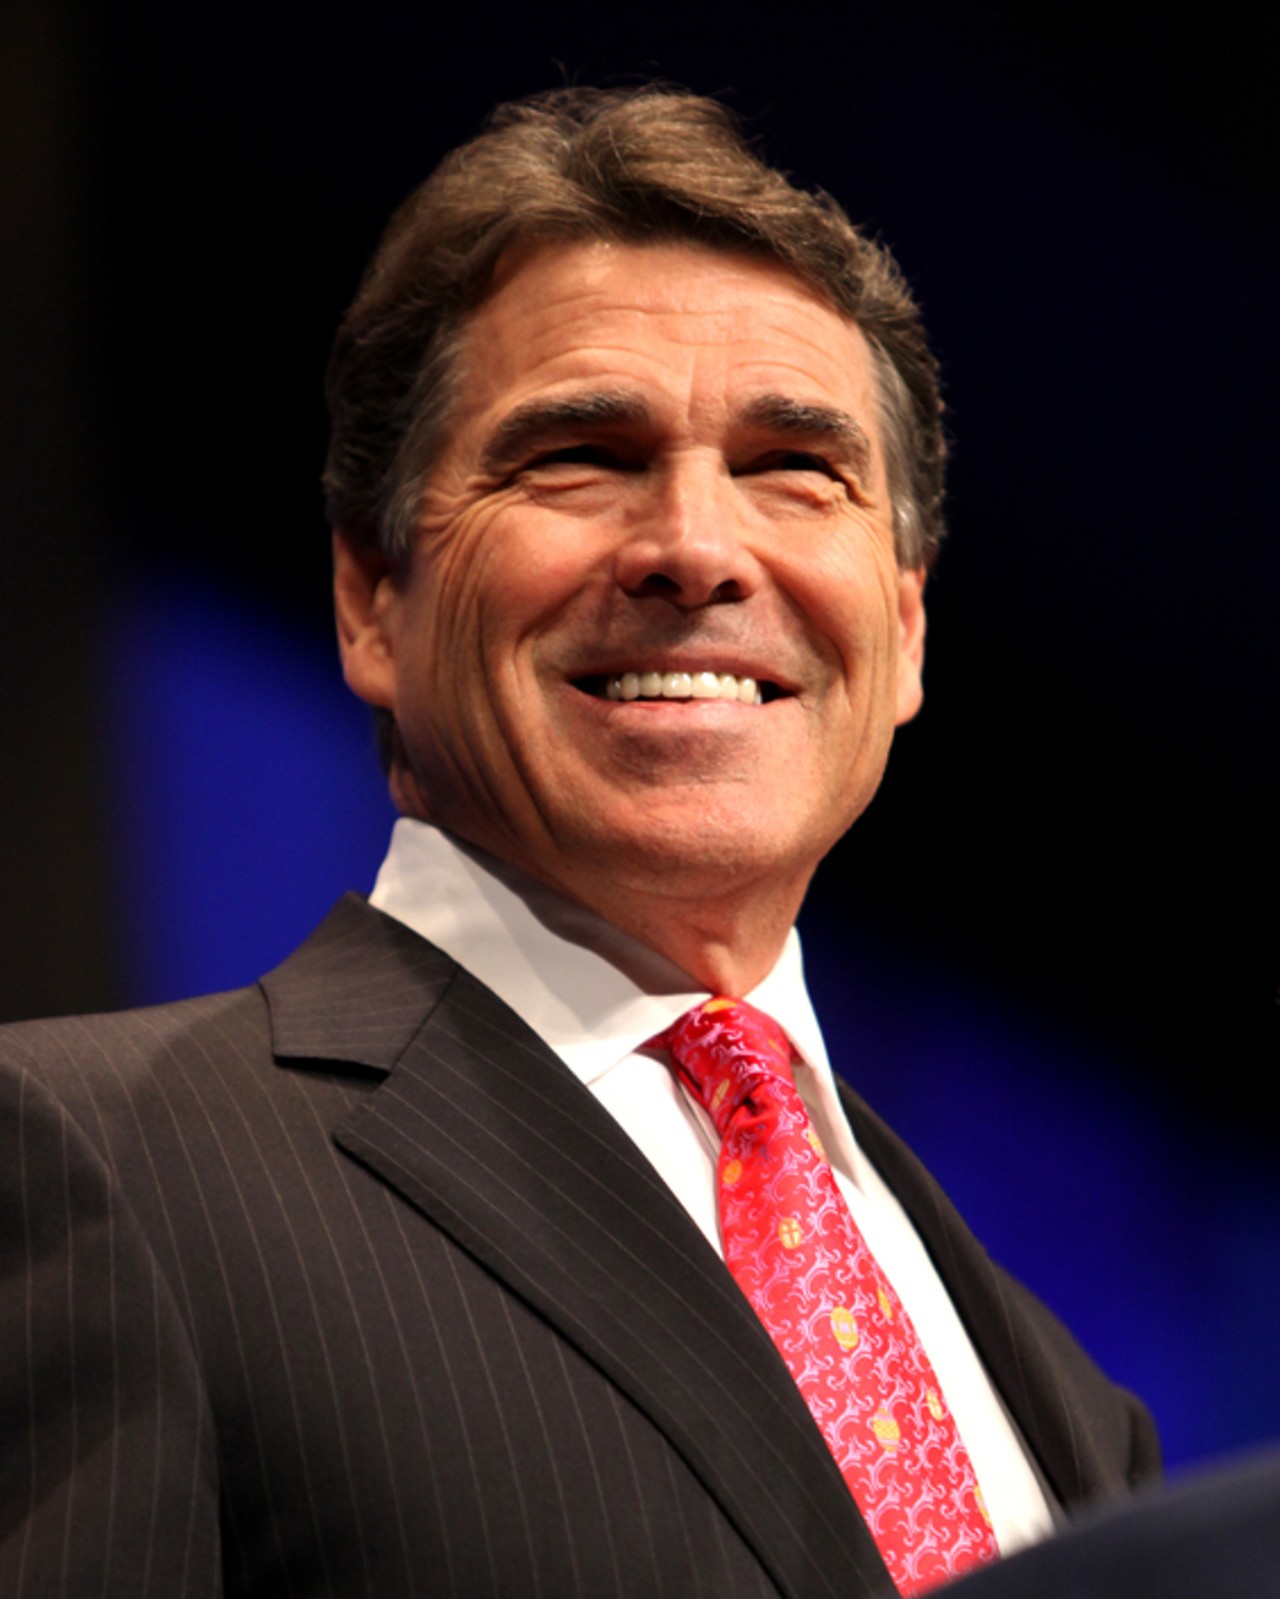 Rick Perry
You know in the movie Multiplicity when&nbsp;Michael Keaton keeps cloning himself over and over again and each time he does, the clone gets a little more stupid? Rick Perry is like George W. Bush on his 8th clone.